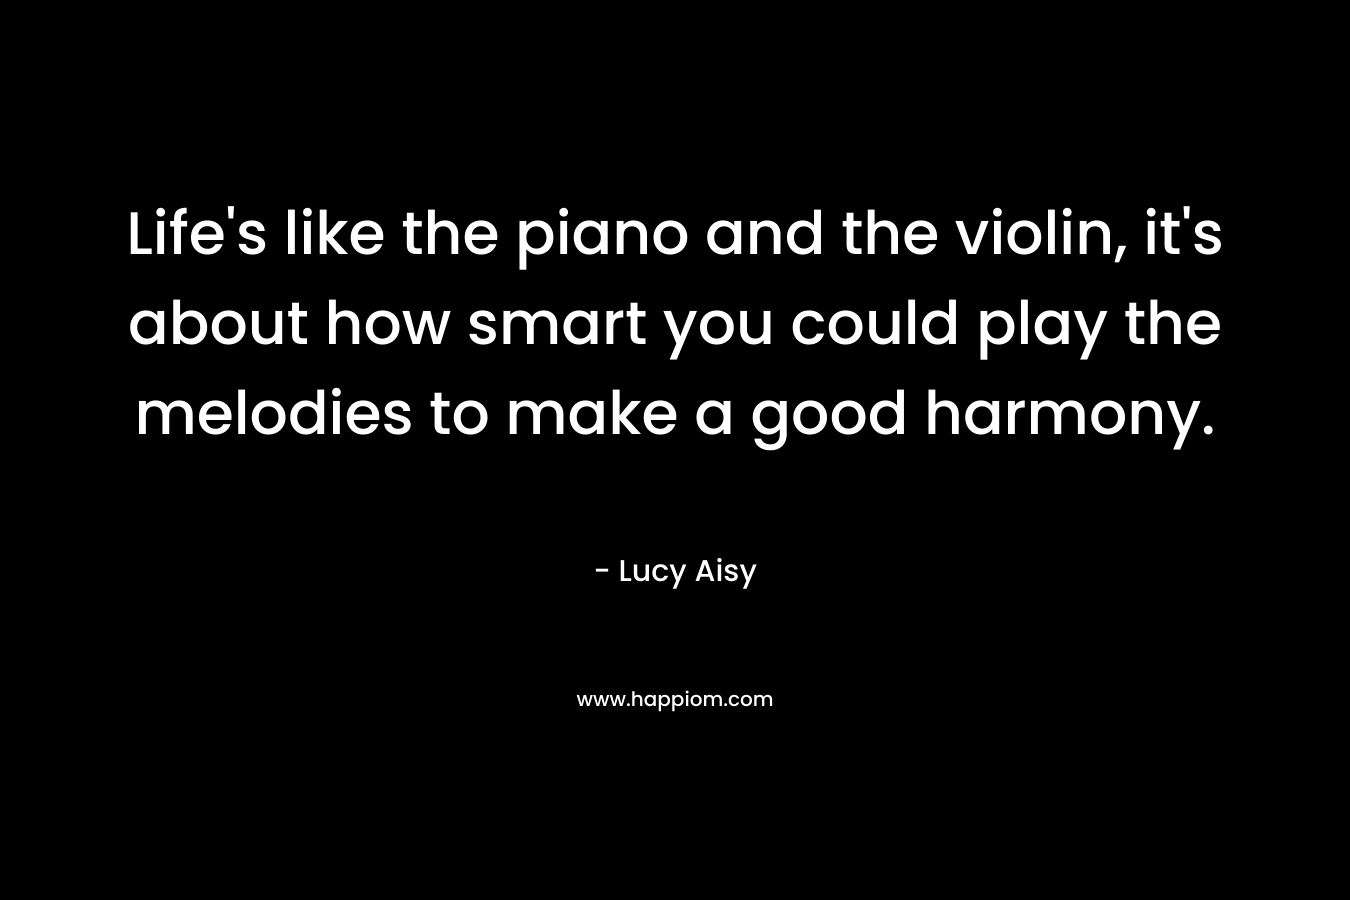 Life’s like the piano and the violin, it’s about how smart you could play the melodies to make a good harmony. – Lucy Aisy